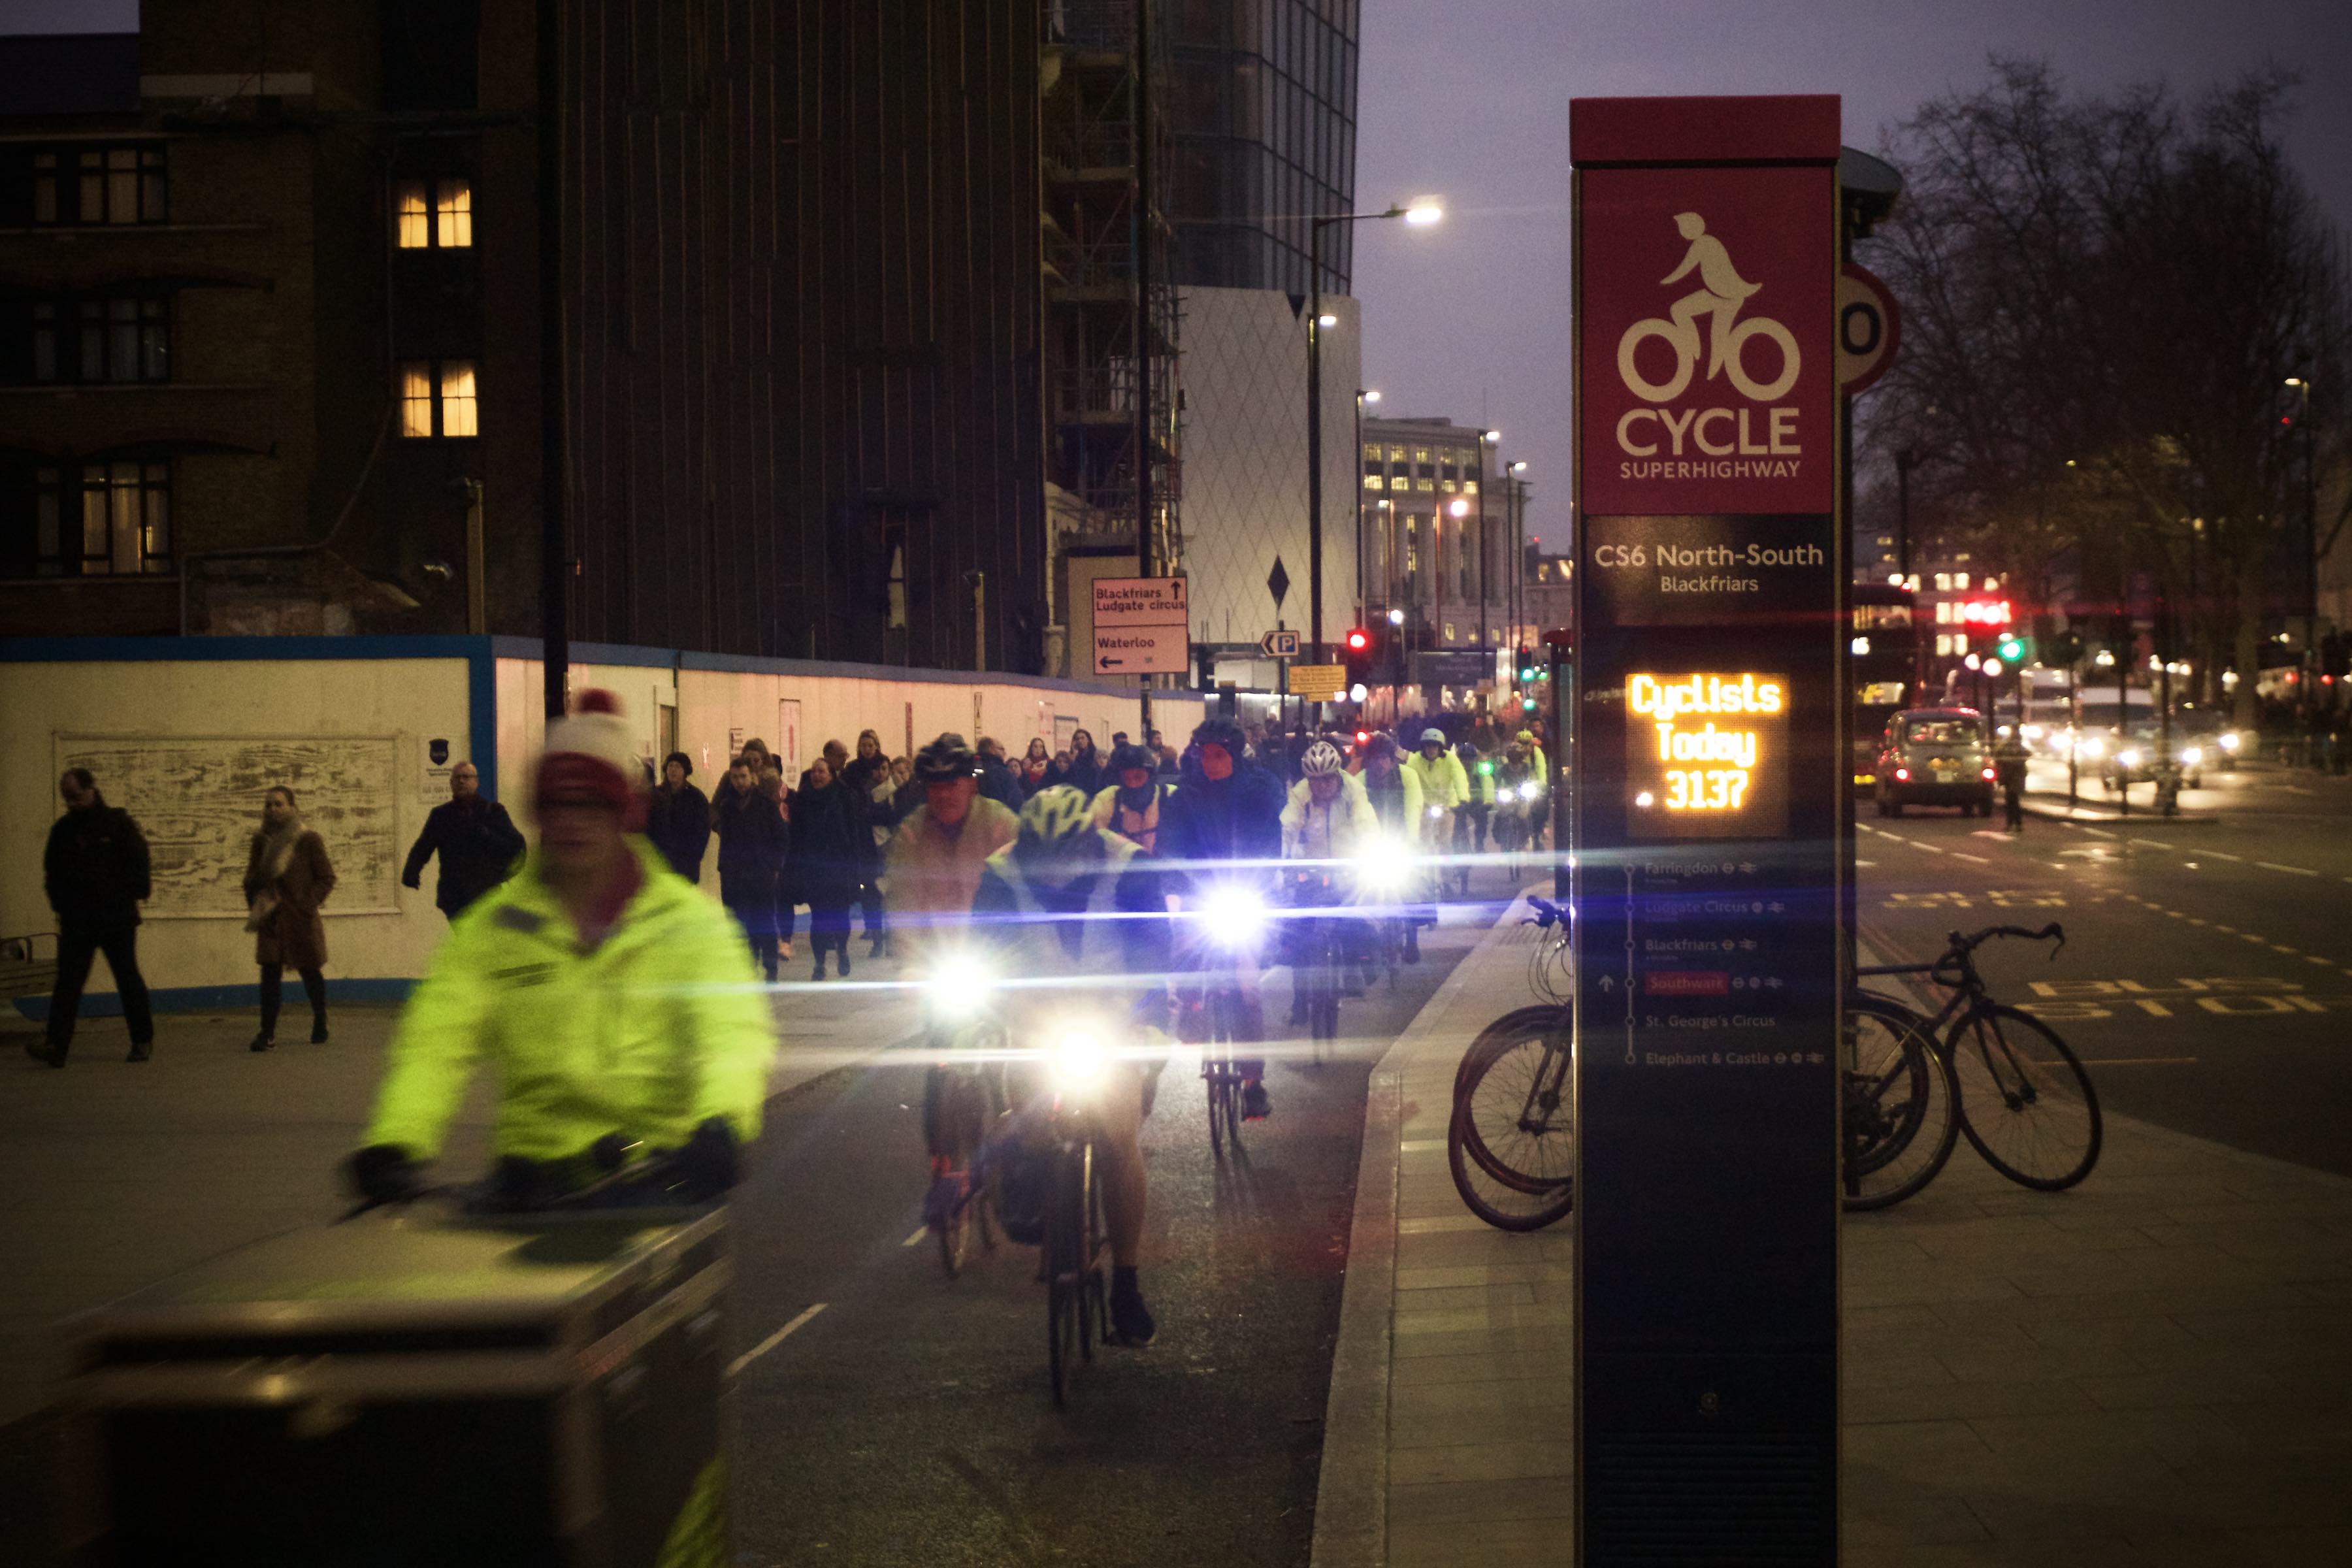 A two-way cycle track at dusk, with a cycle counter showing that 3,137 people cycled past it that day.